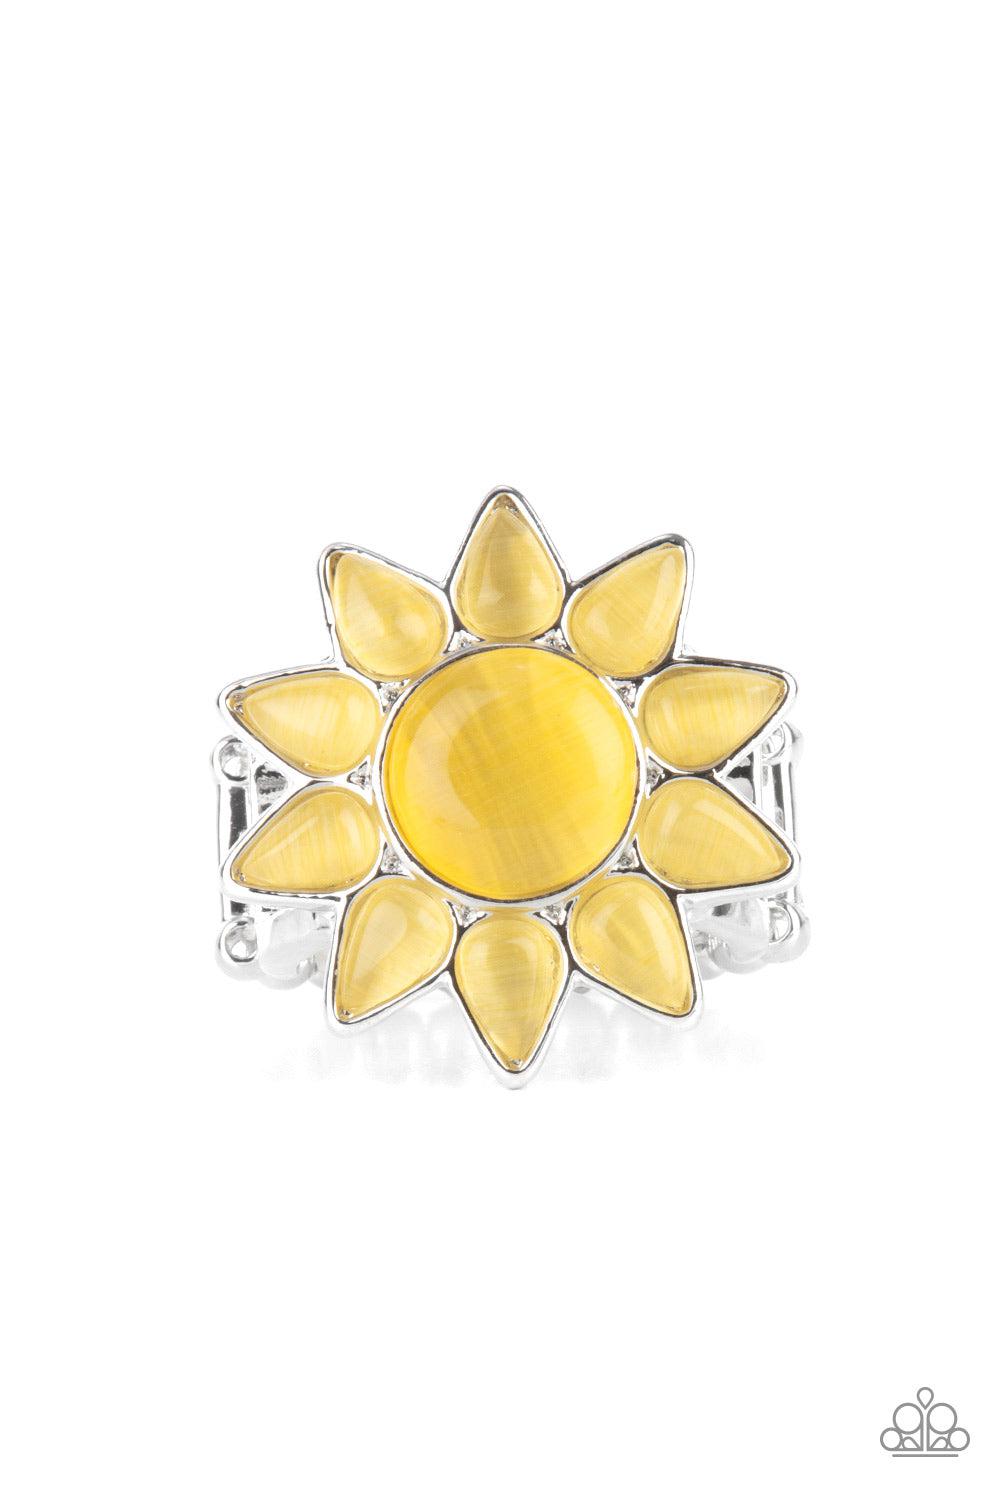 Blossoming Sunbeams Yellow Cat&#39;s Eye Stone Ring - Paparazzi Accessories- lightbox - CarasShop.com - $5 Jewelry by Cara Jewels